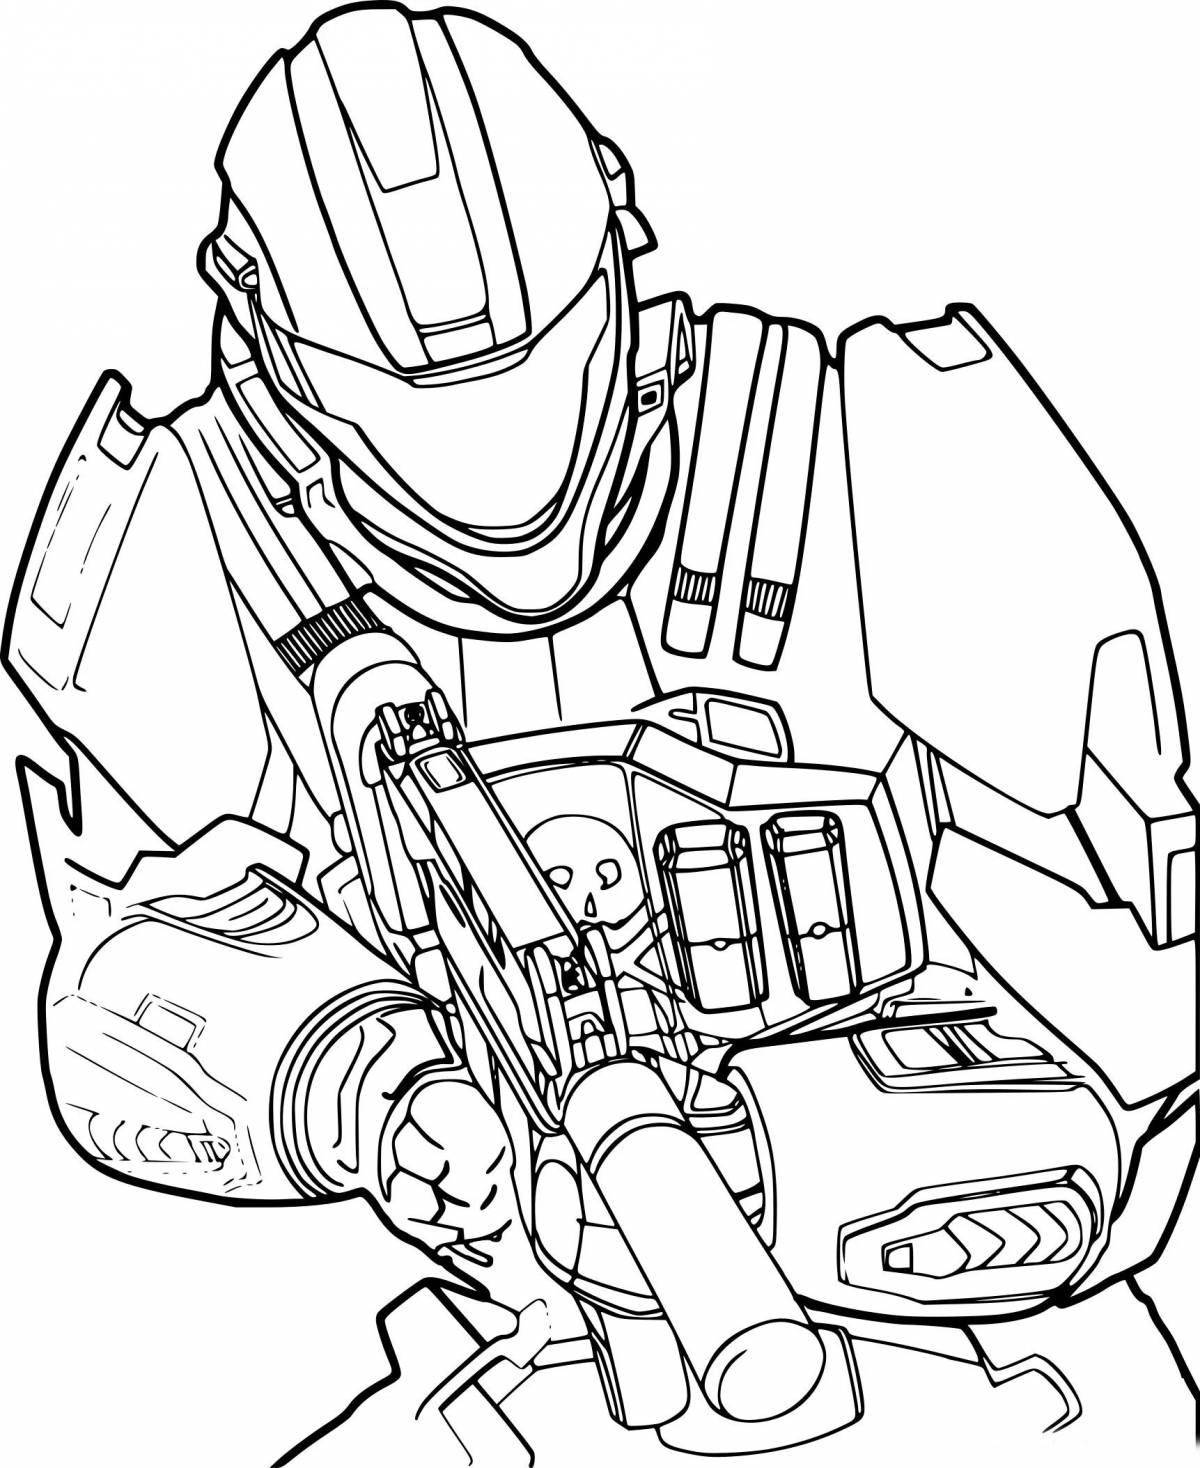 Regal warface coloring page